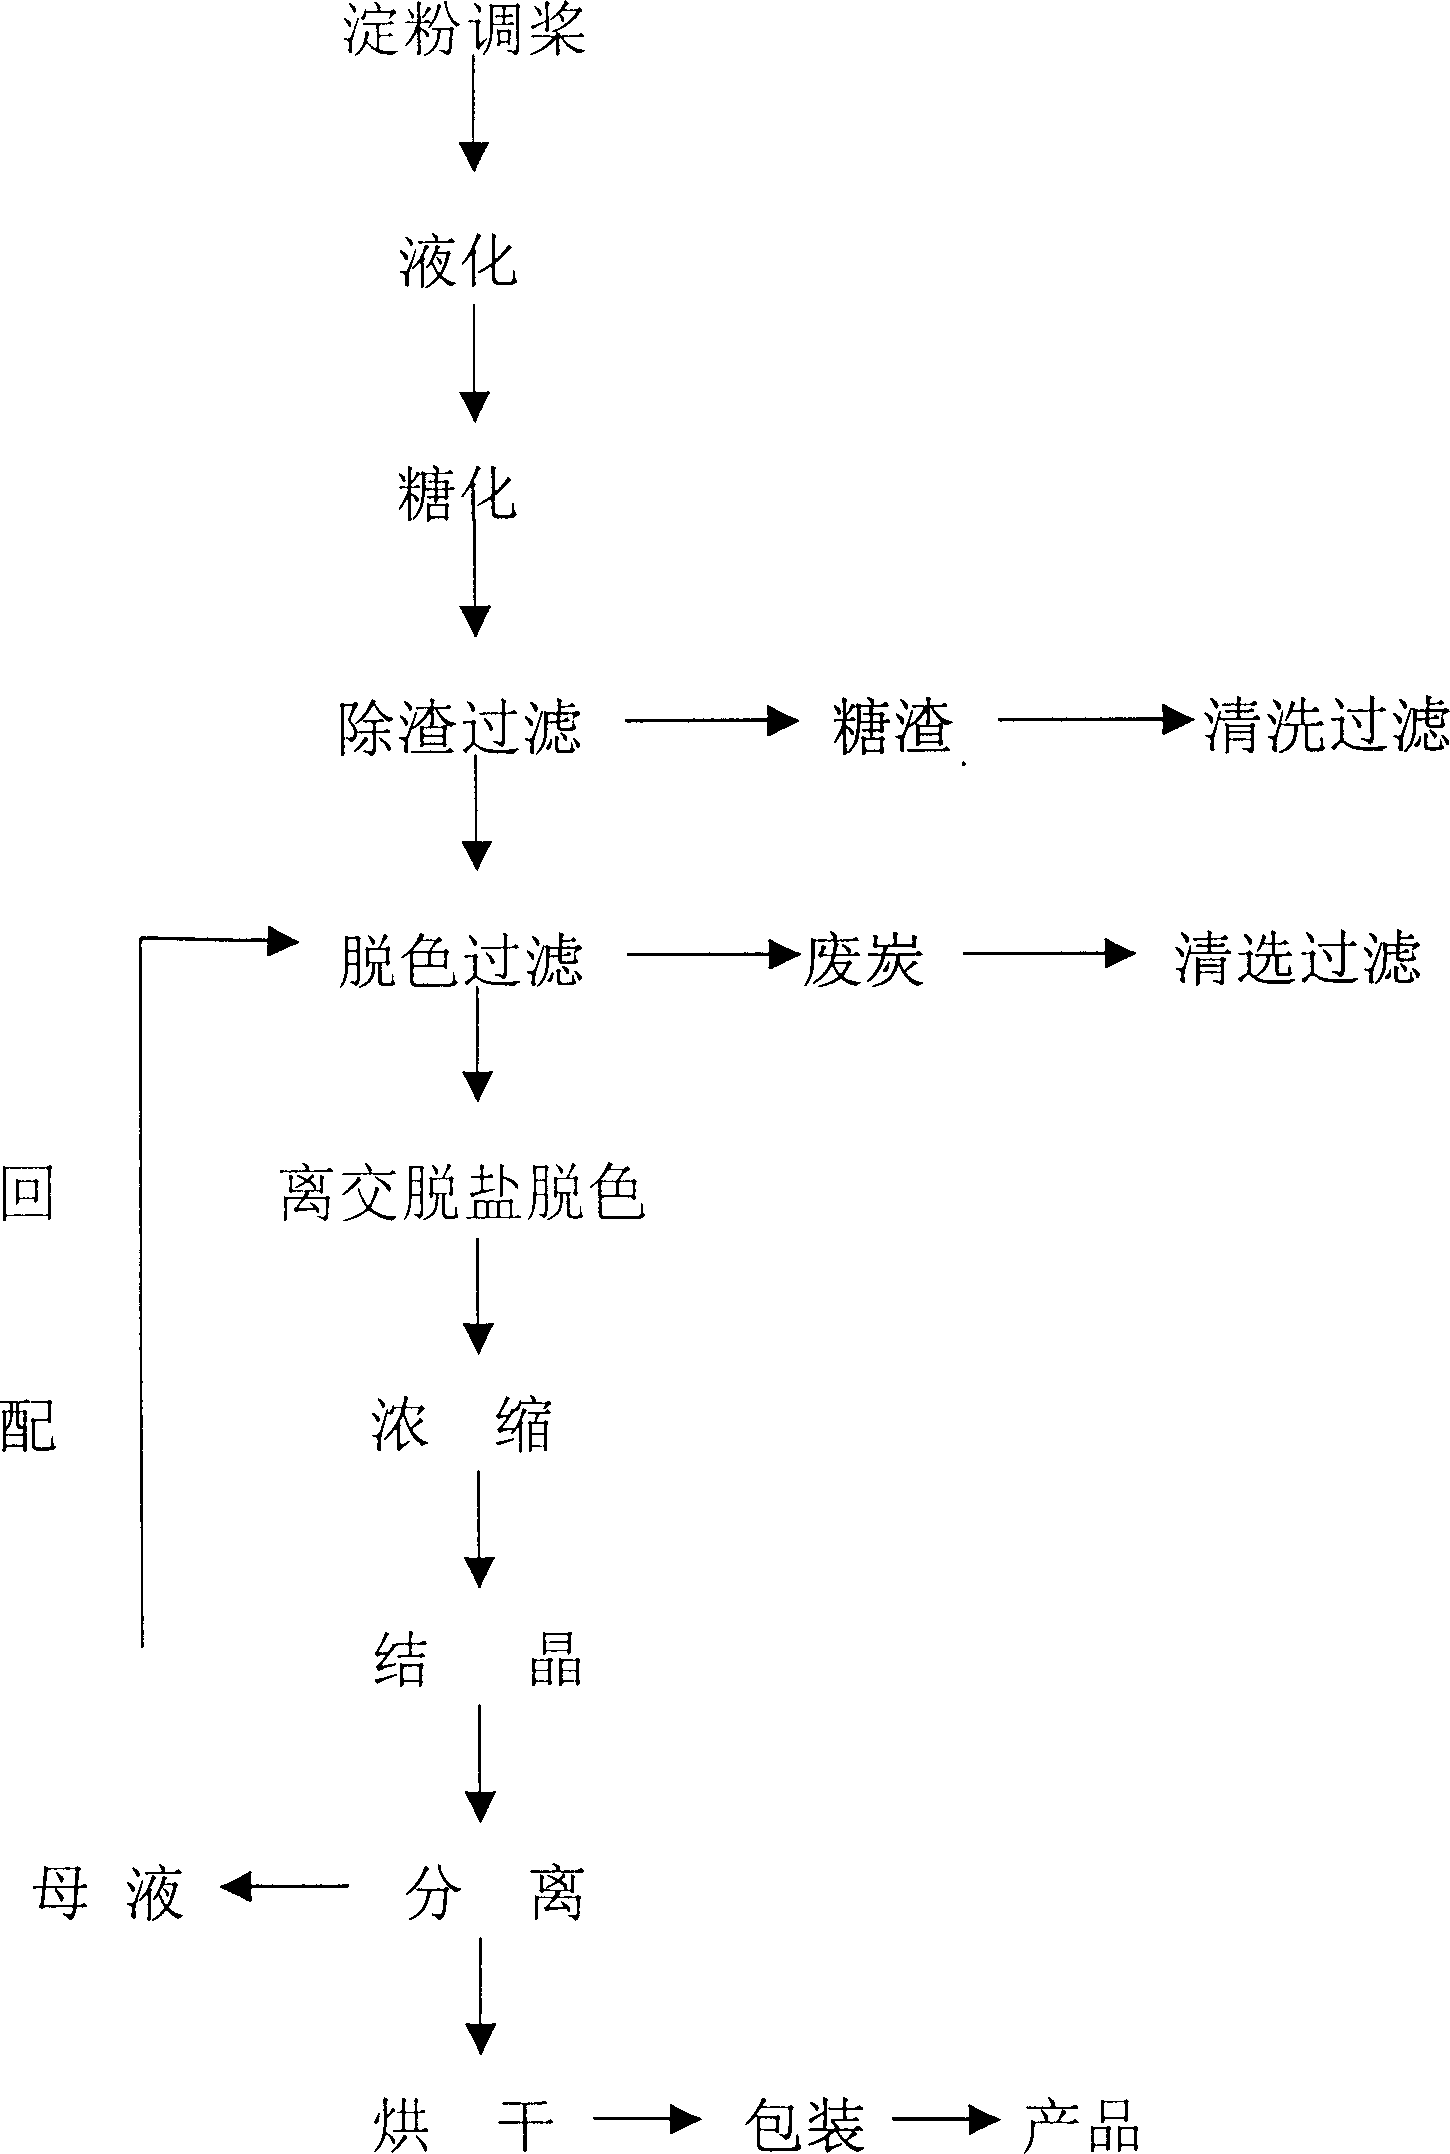 Crystallization process for glucose production